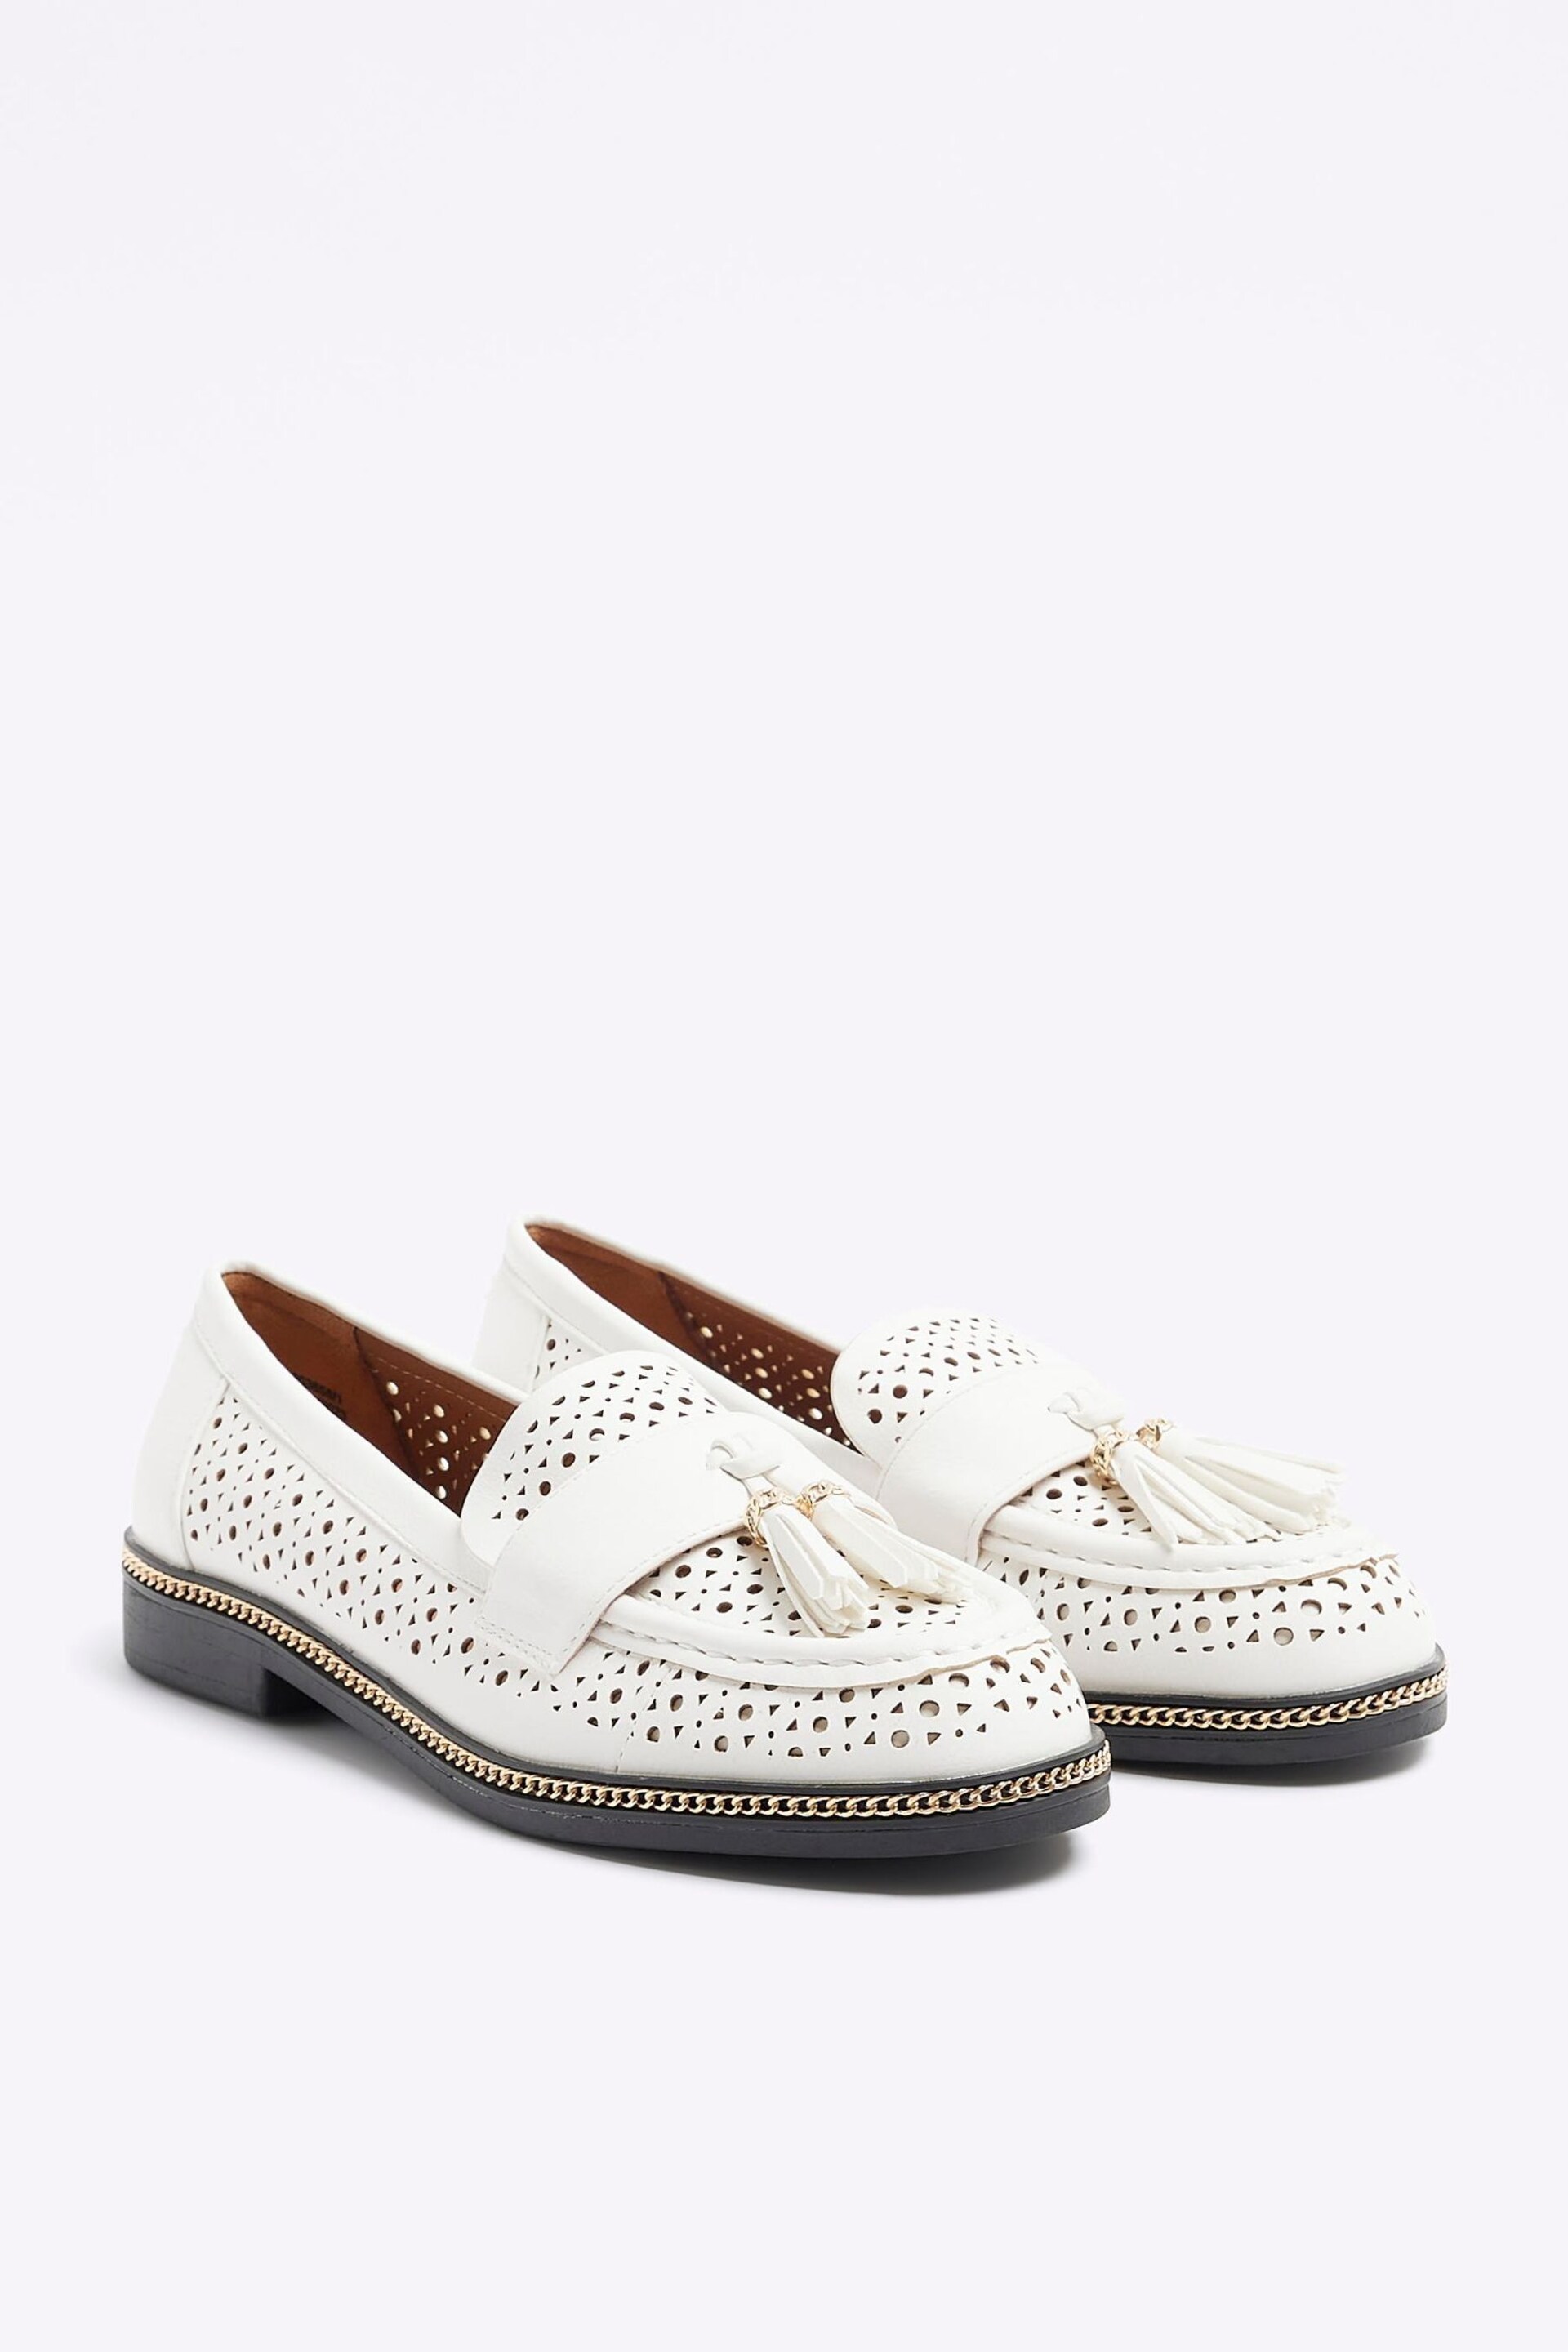 River Island White Laser Cut Tassle Loafers - Image 2 of 4